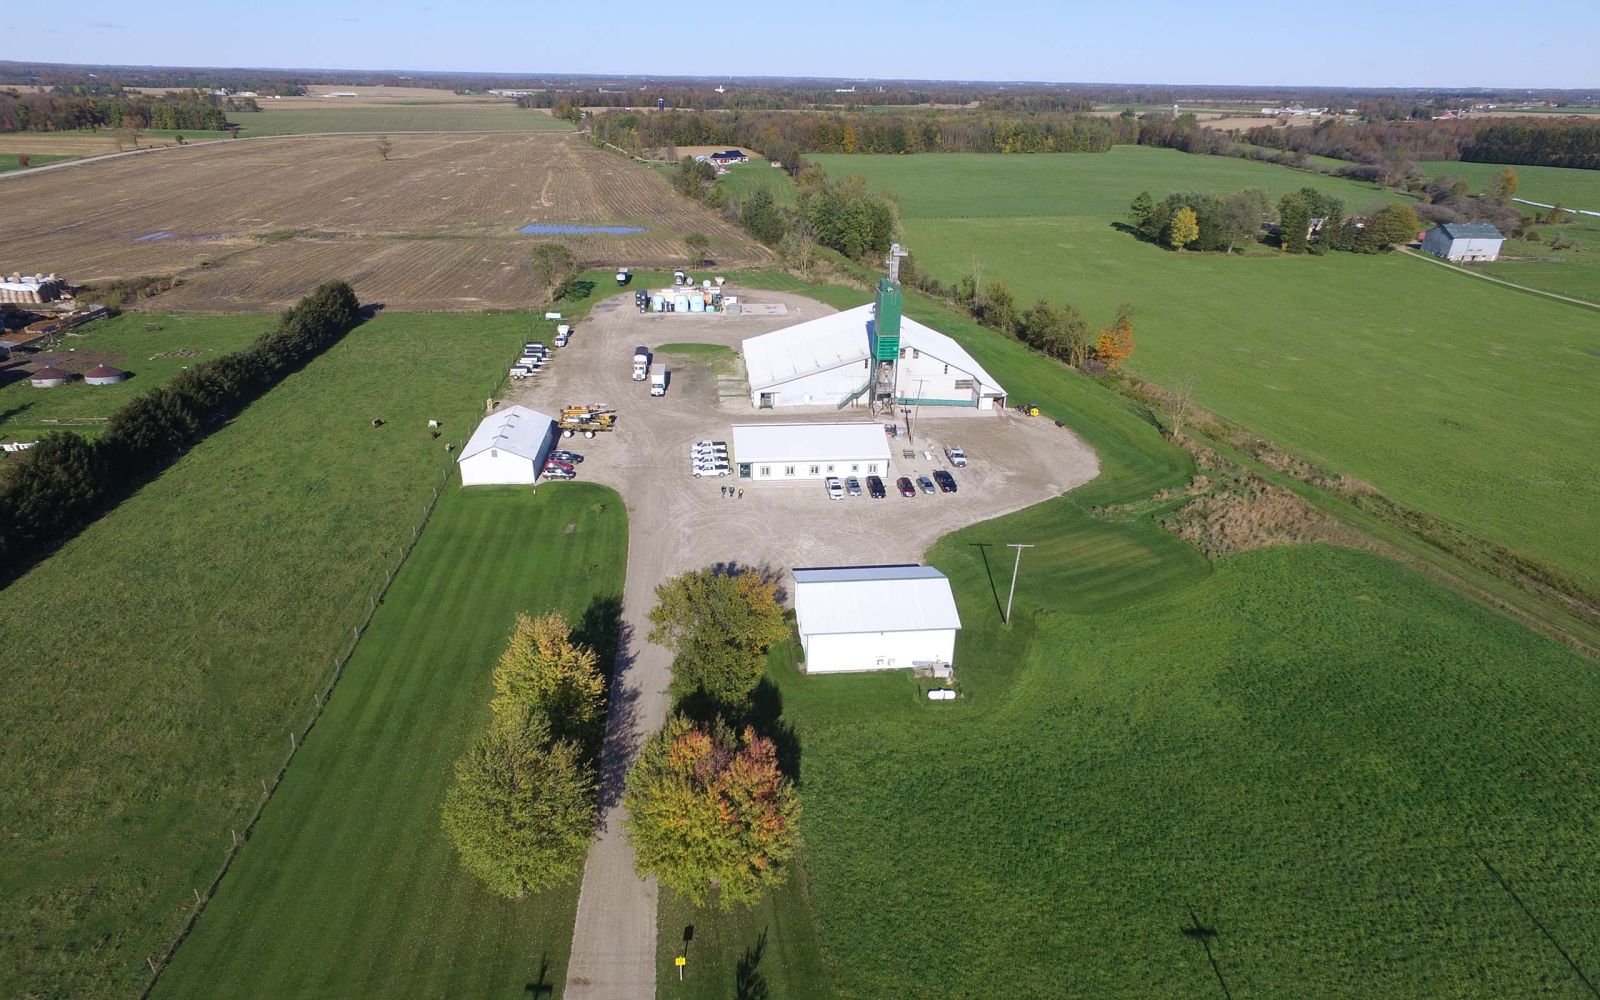 Harriston Agromart arial image view of land and facility